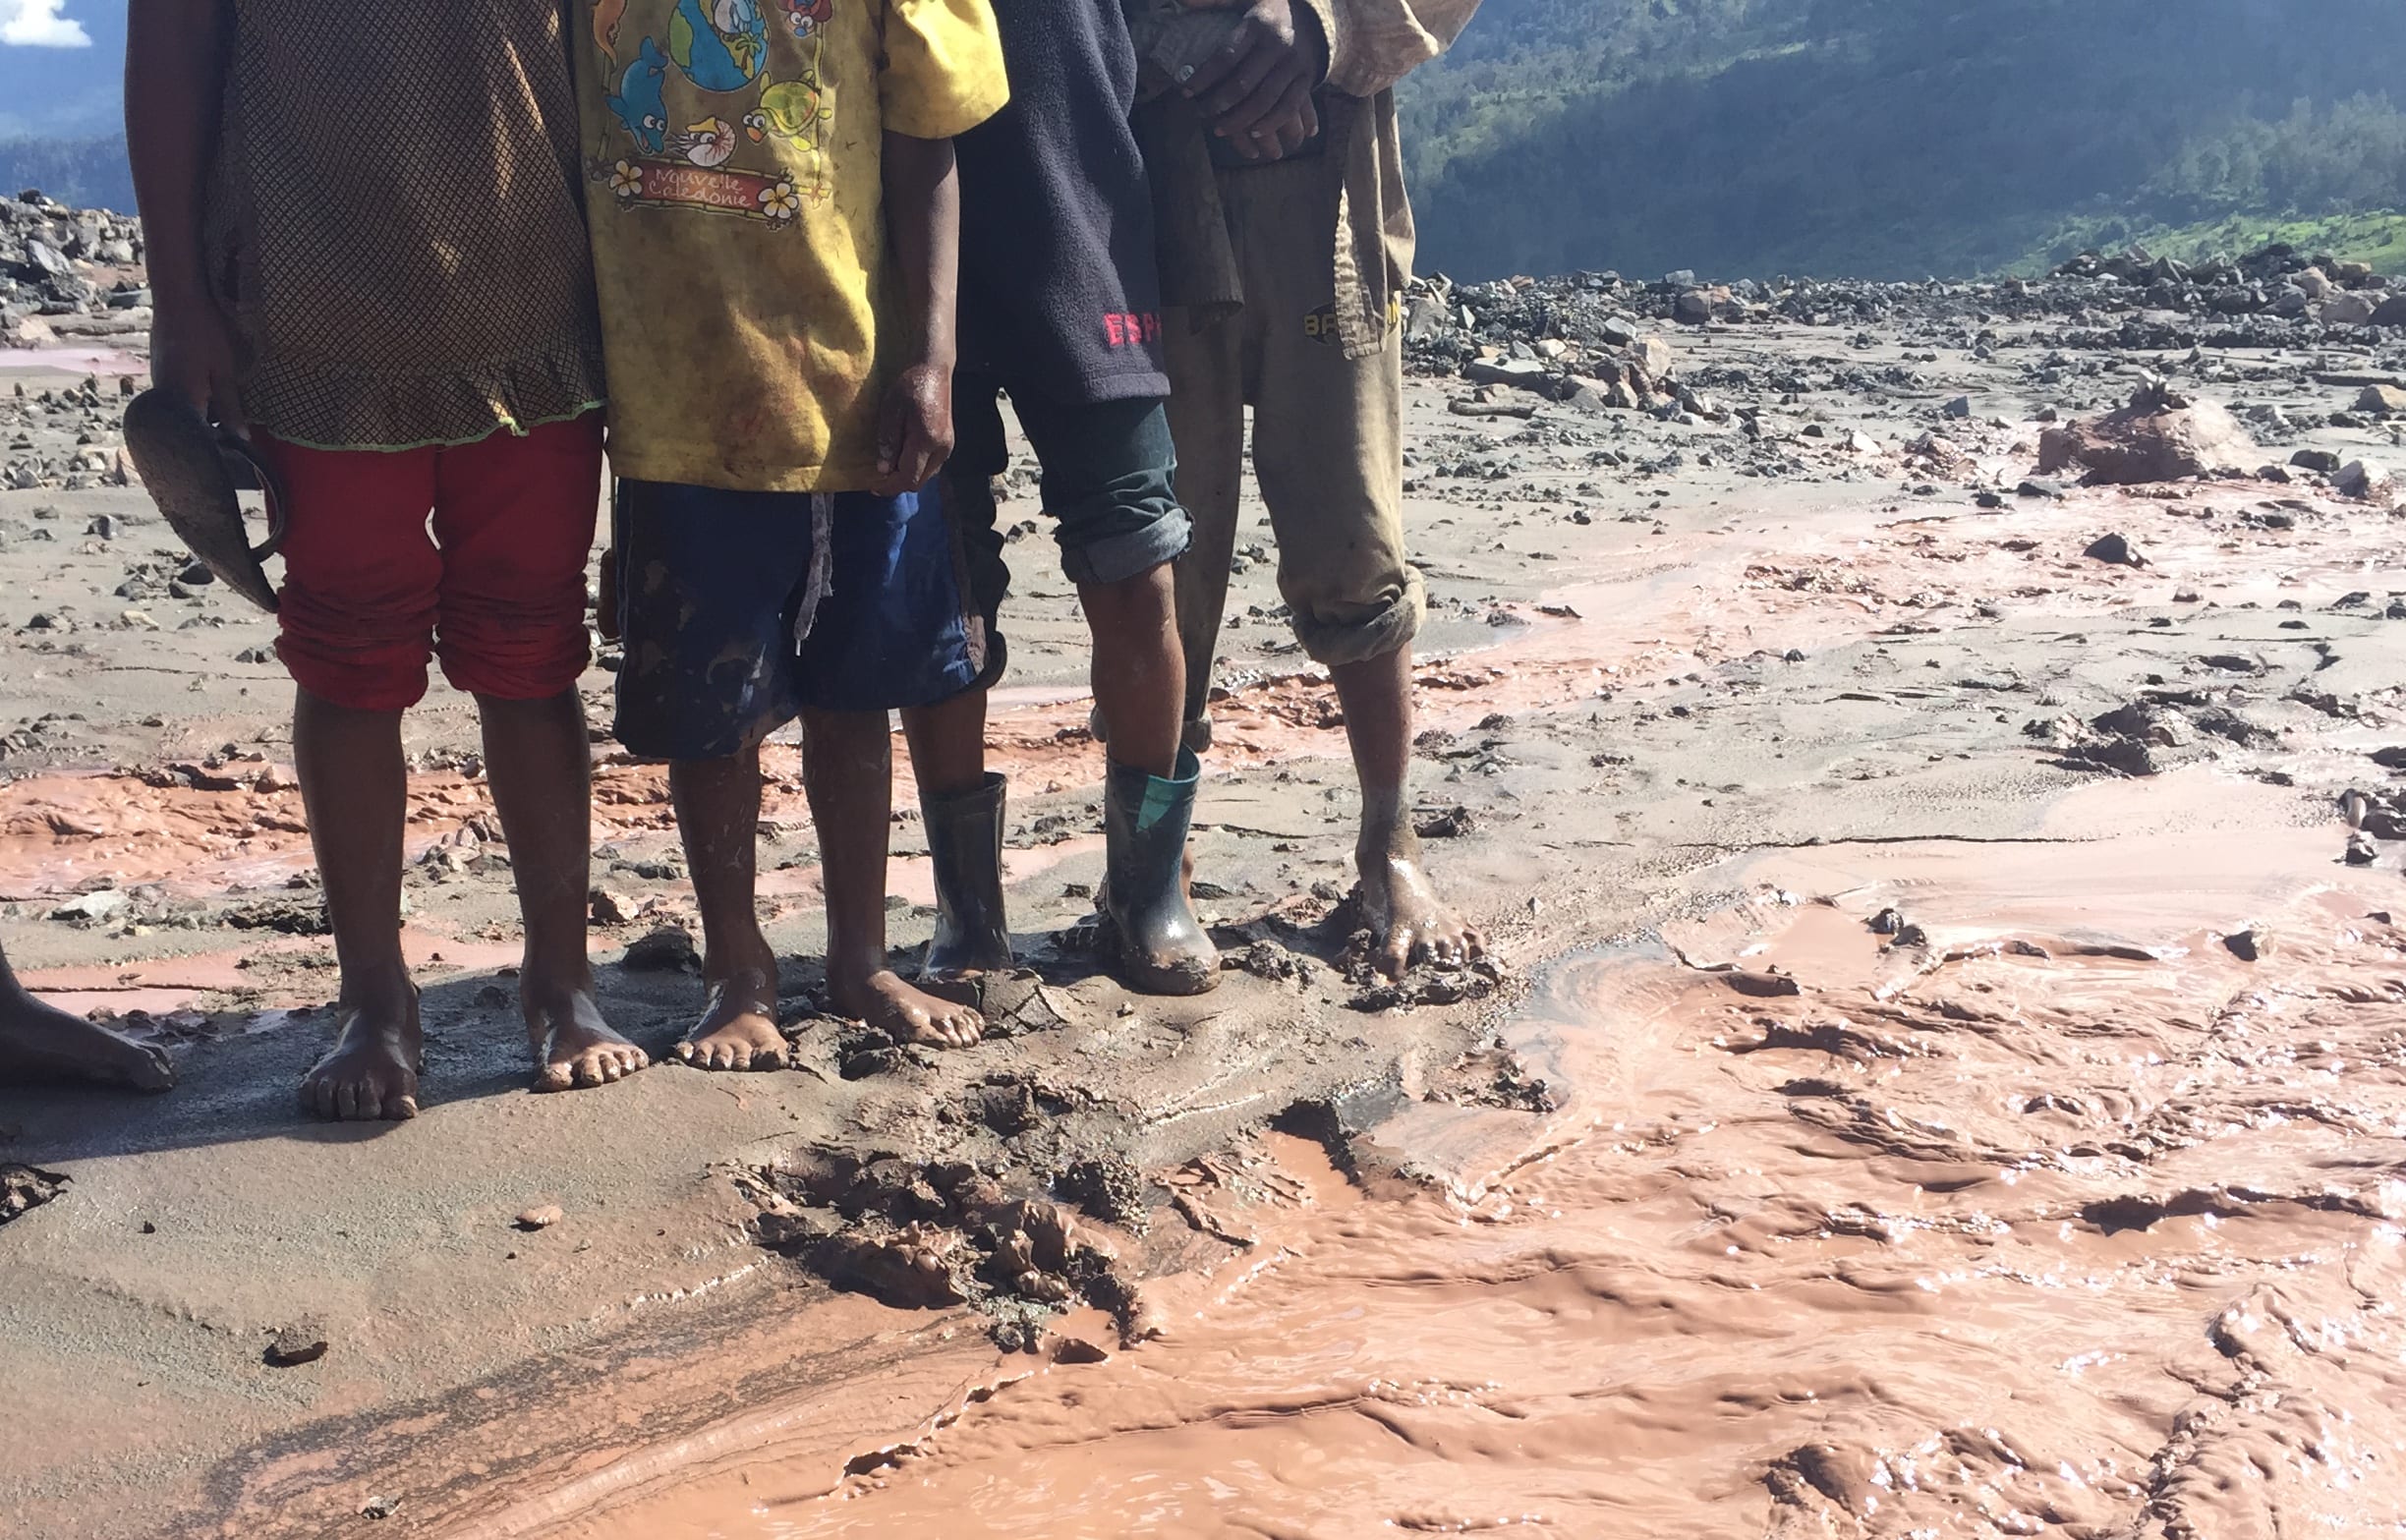 Communities living around Papua New Guinea's Porgera gold mine lack enough access to clean water to meet their basic needs.